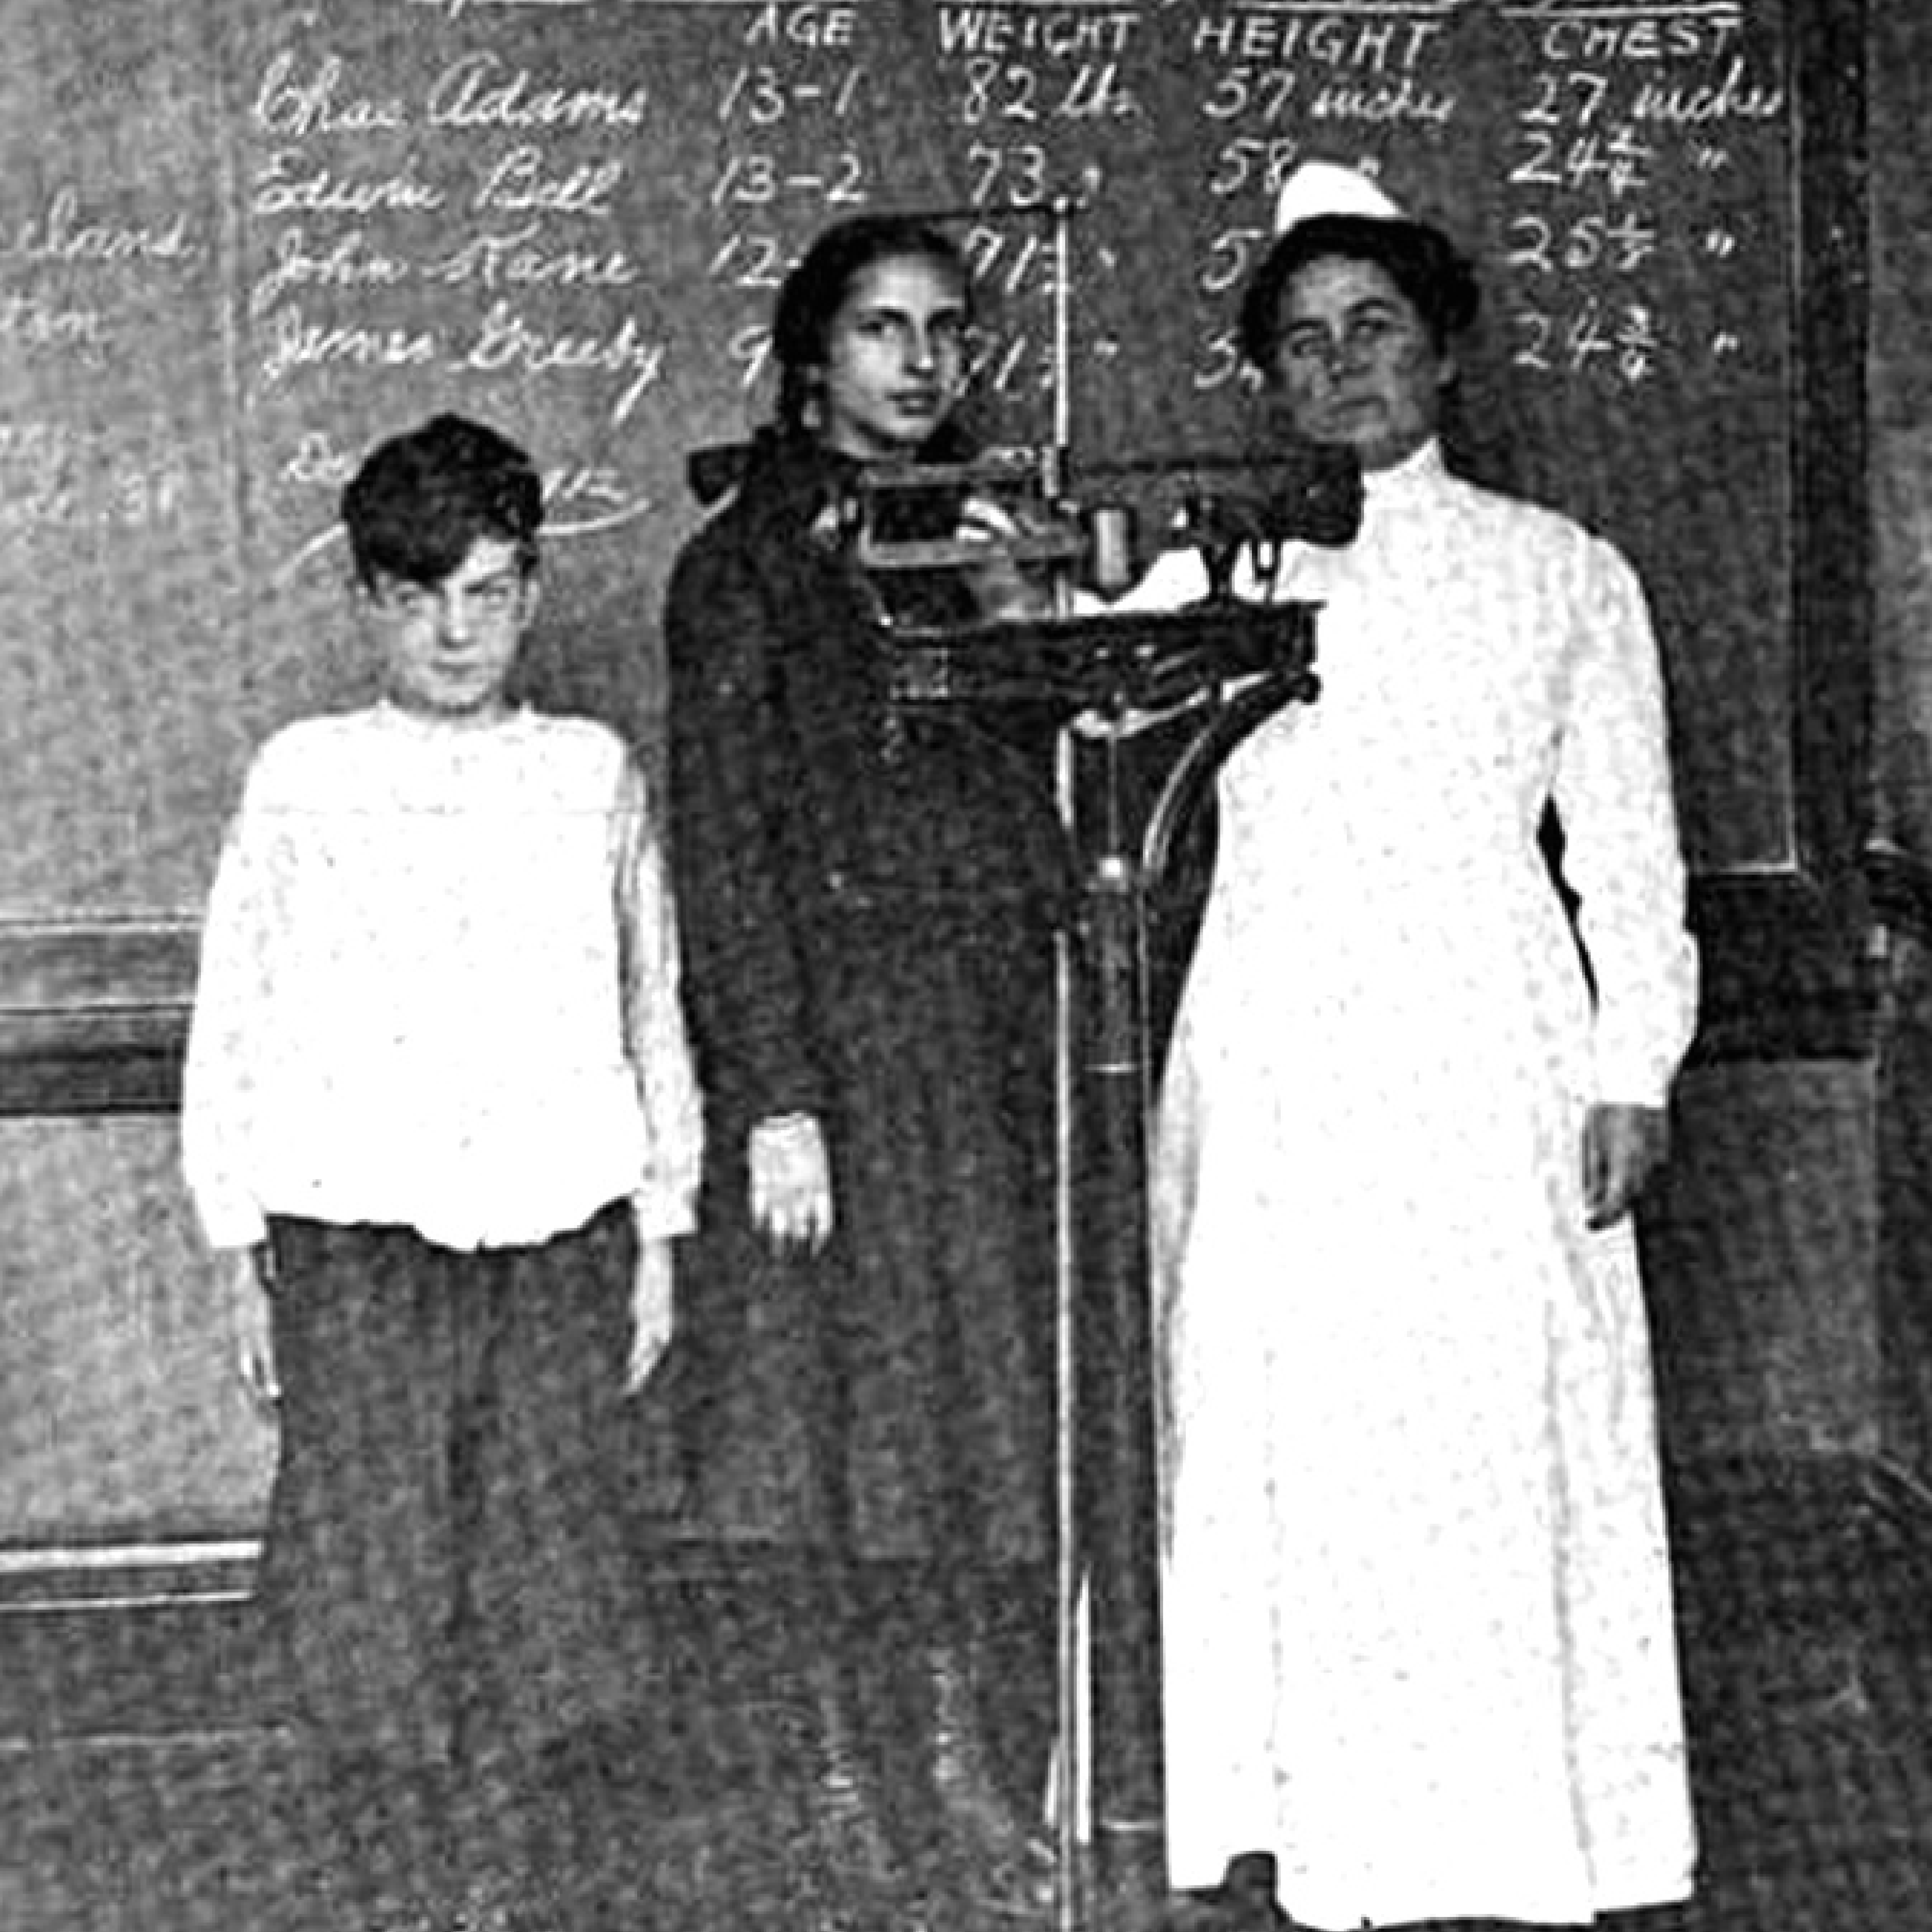 Vintage photo of nurse and children posing in front of a chalkboard